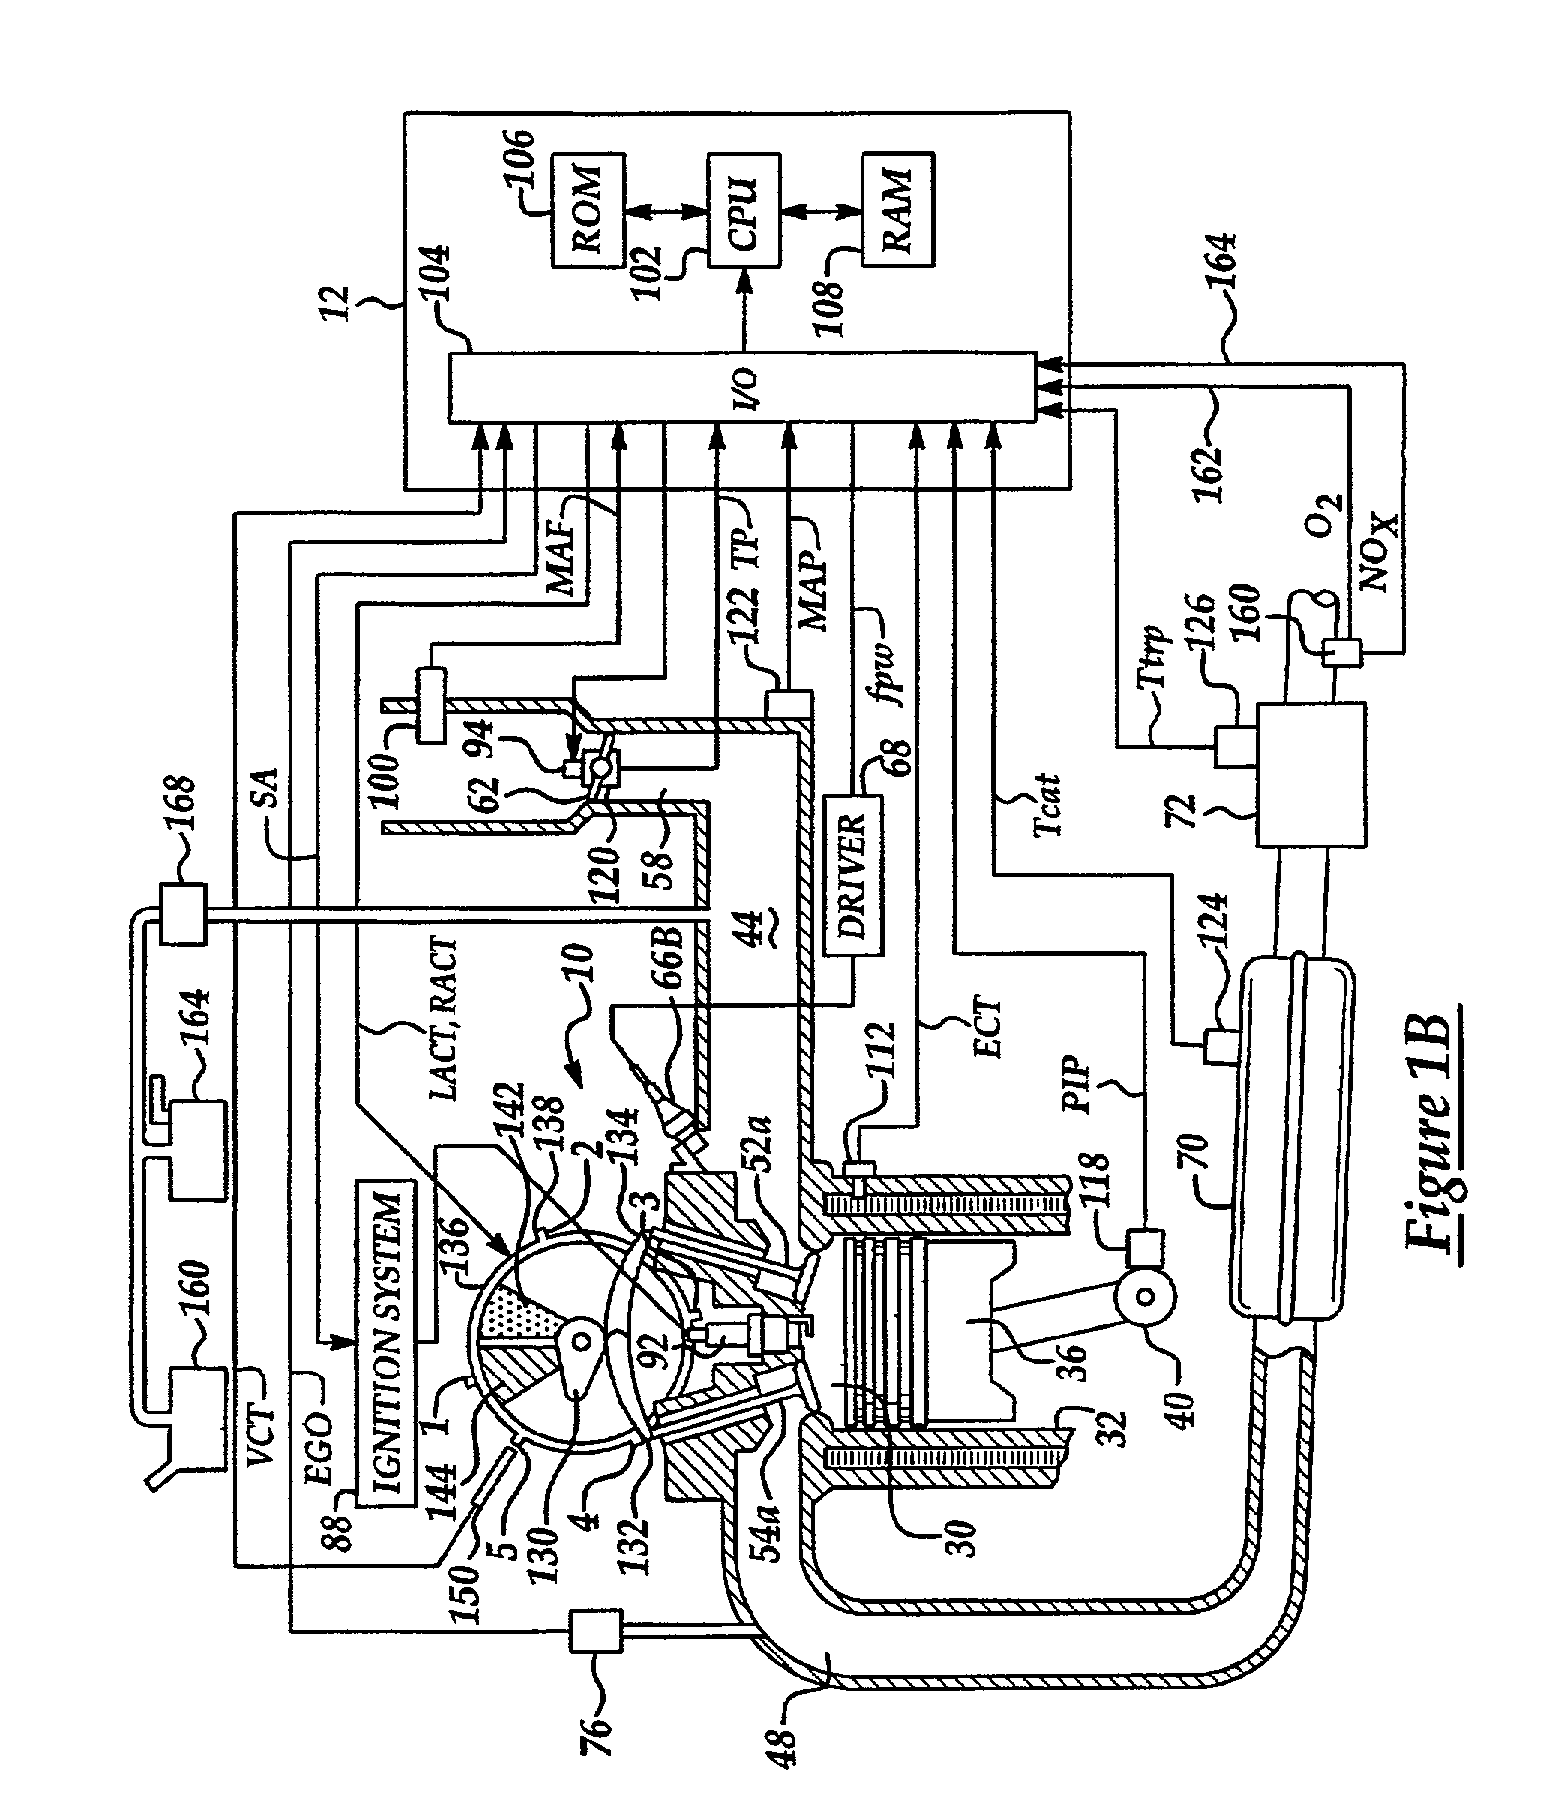 Method for split ignition timing for idle speed control of an engine